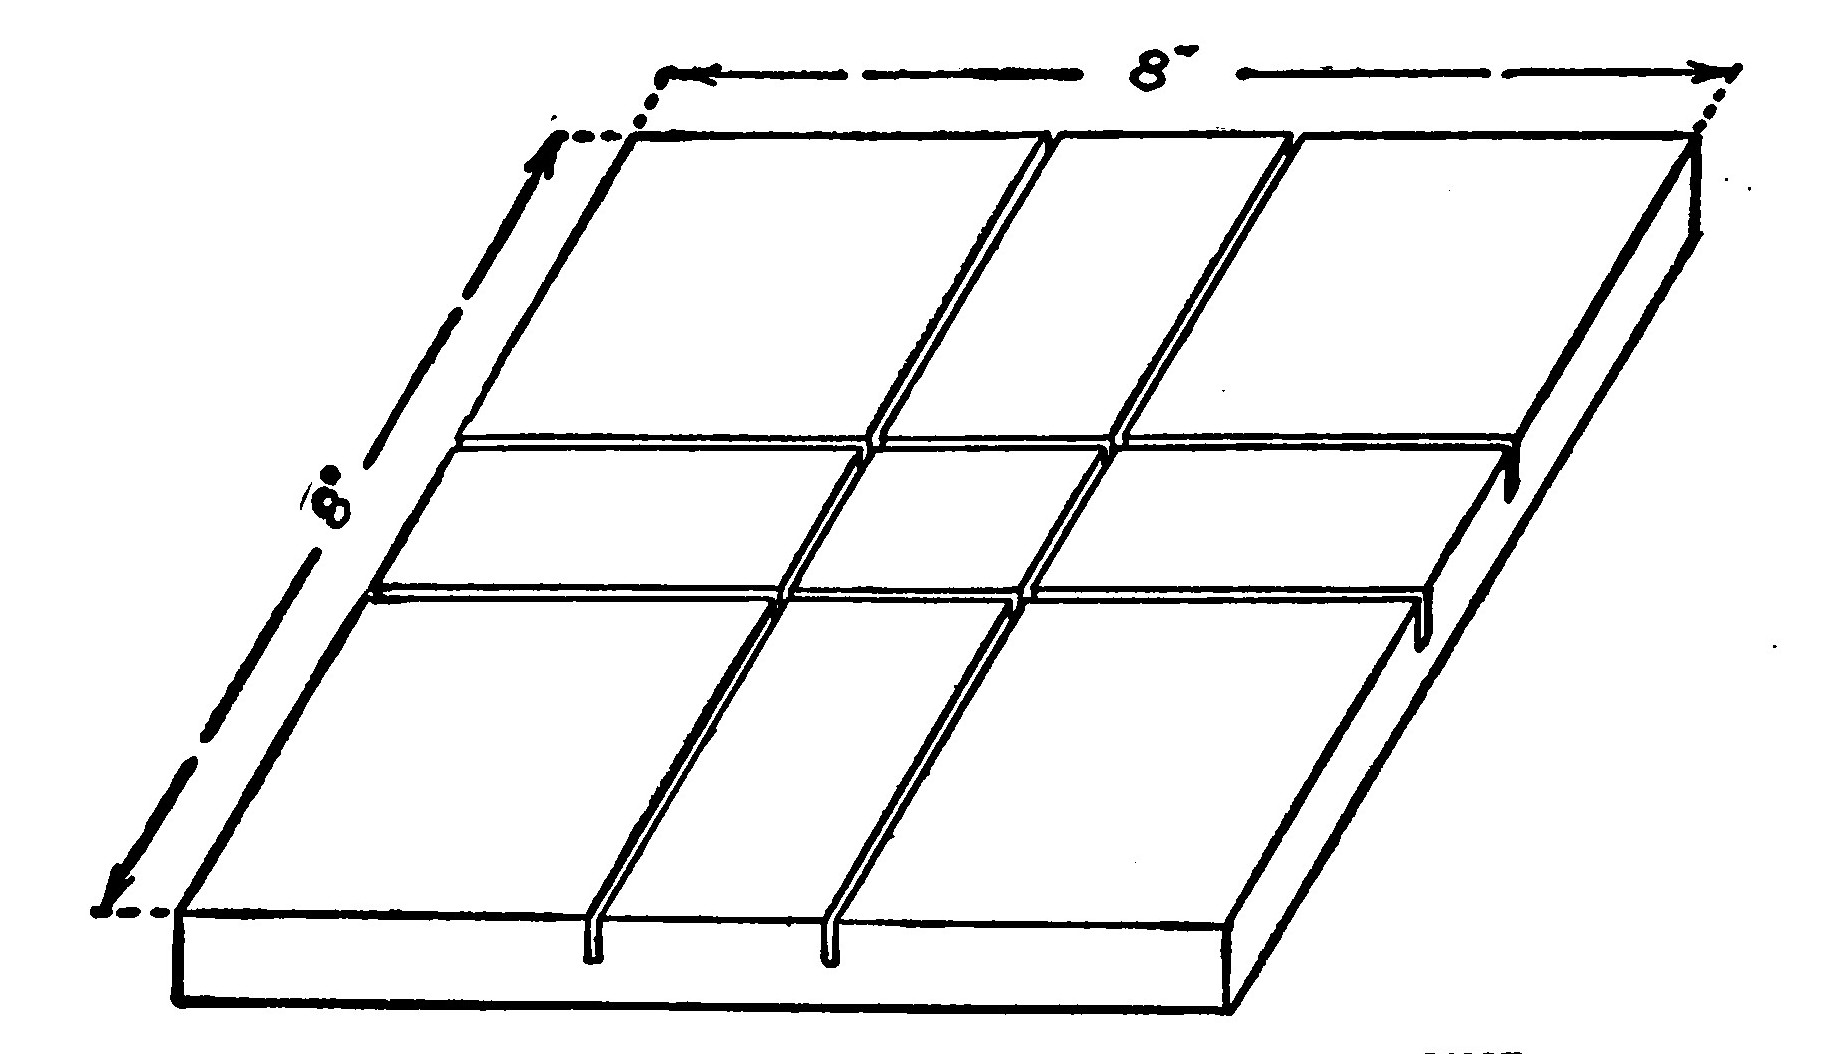 Fig. 275.—Details of the Base of the Cross-over.